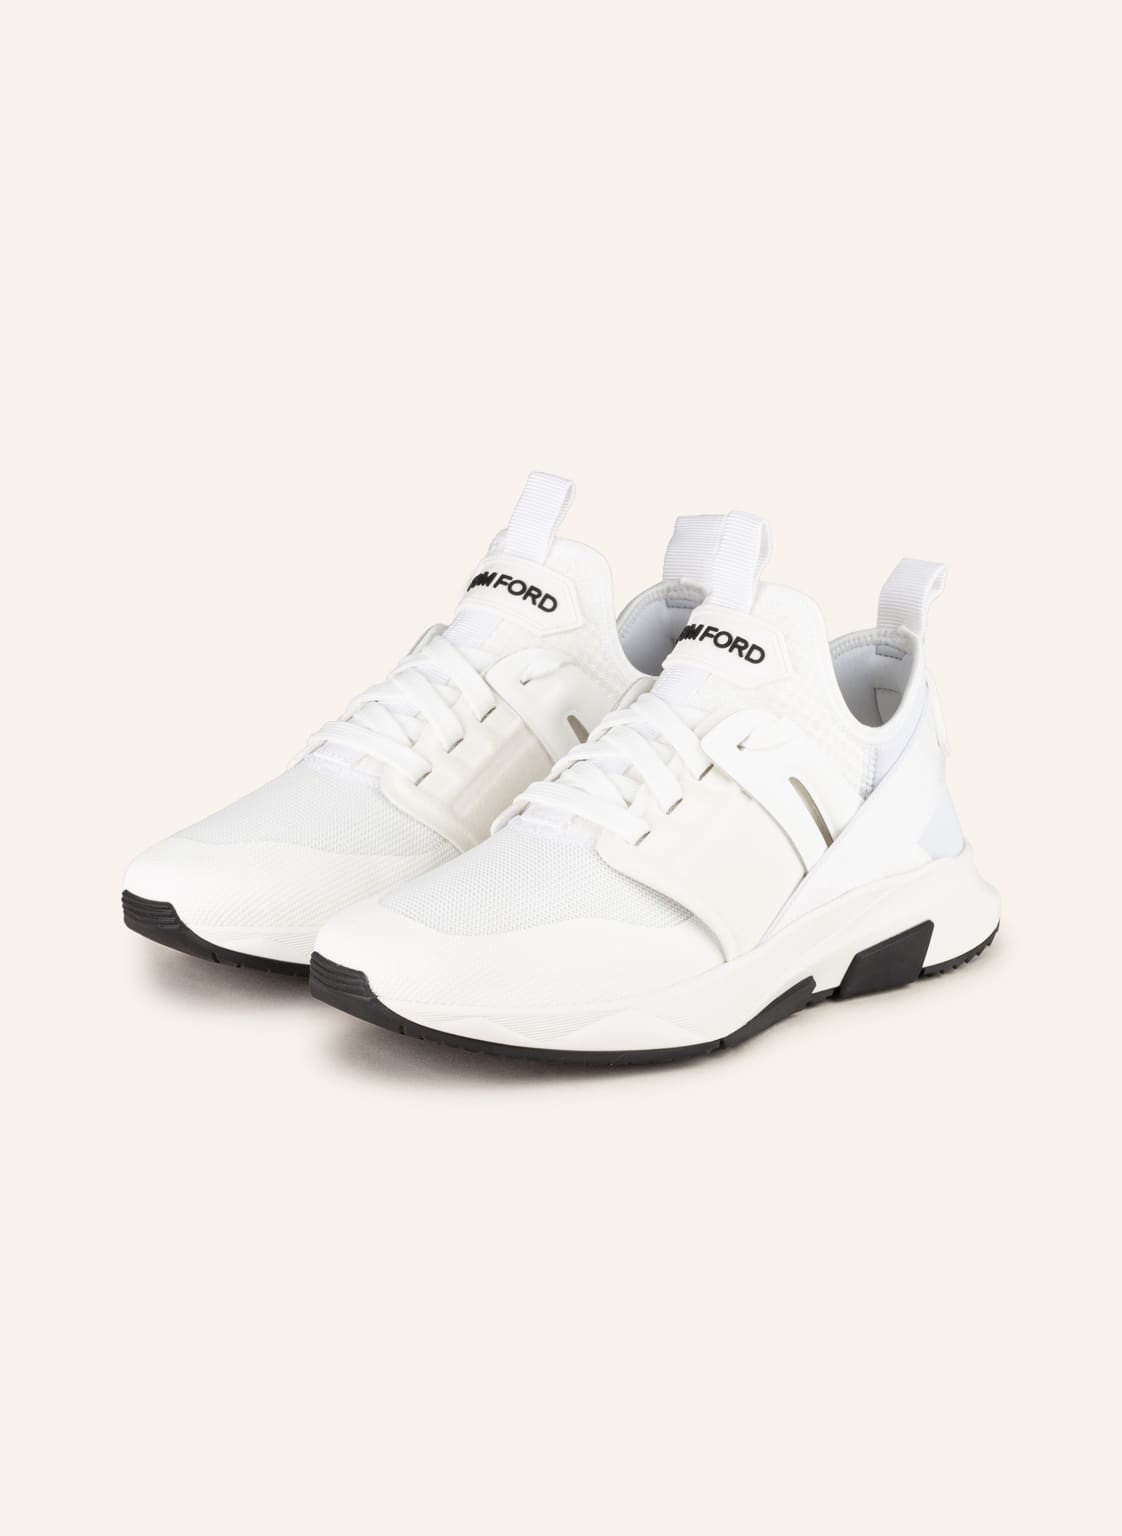 Tom Ford Sneaker Jago weiss von Tom Ford